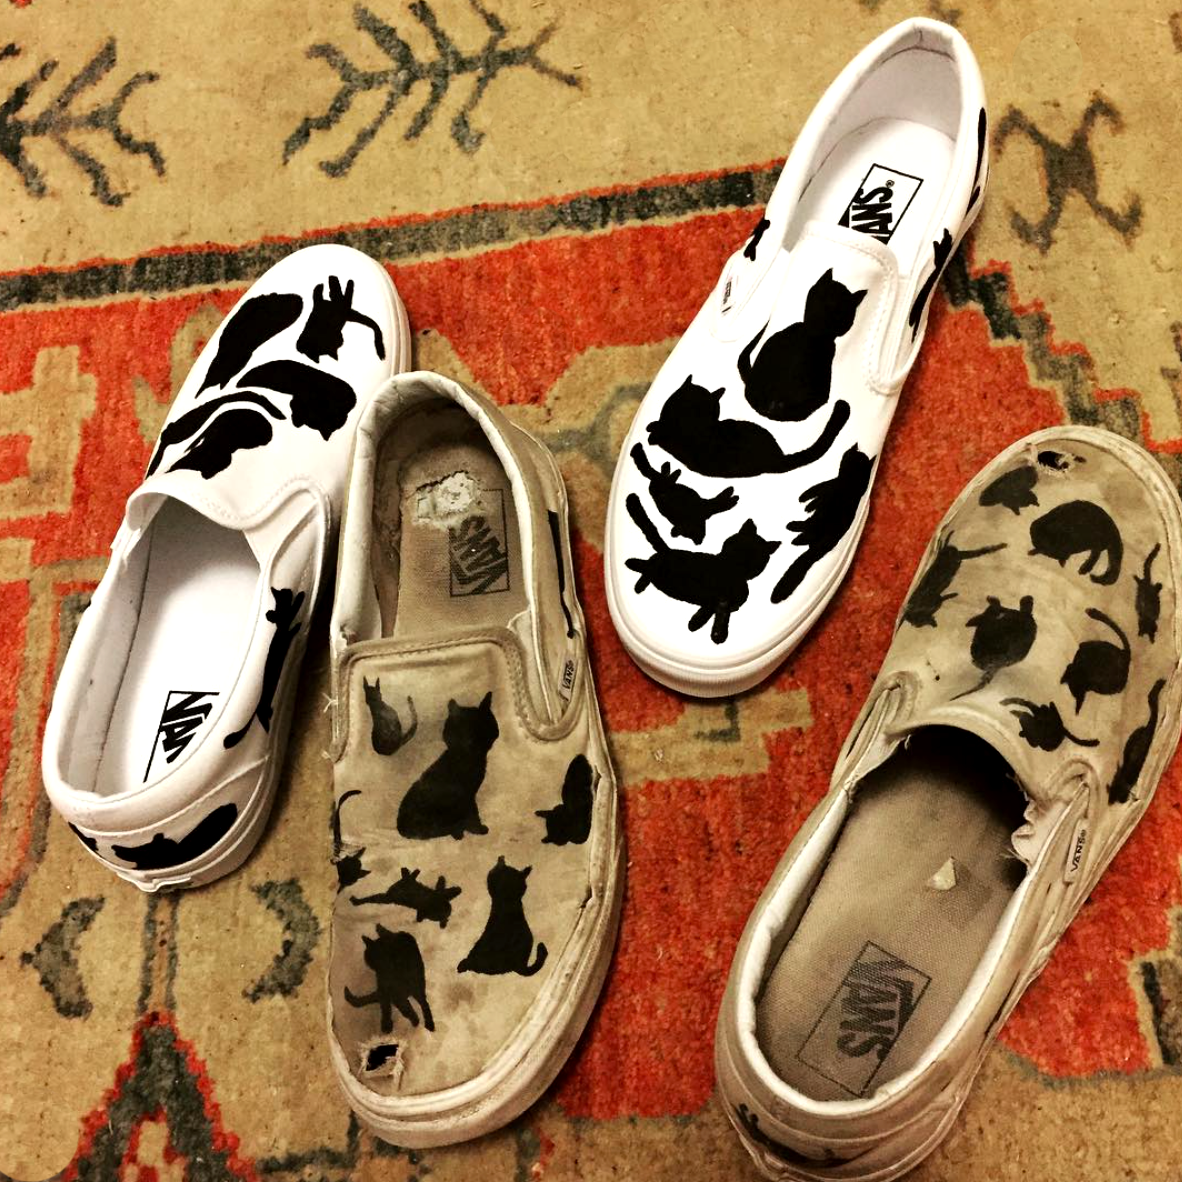 vans shoes with cats on them